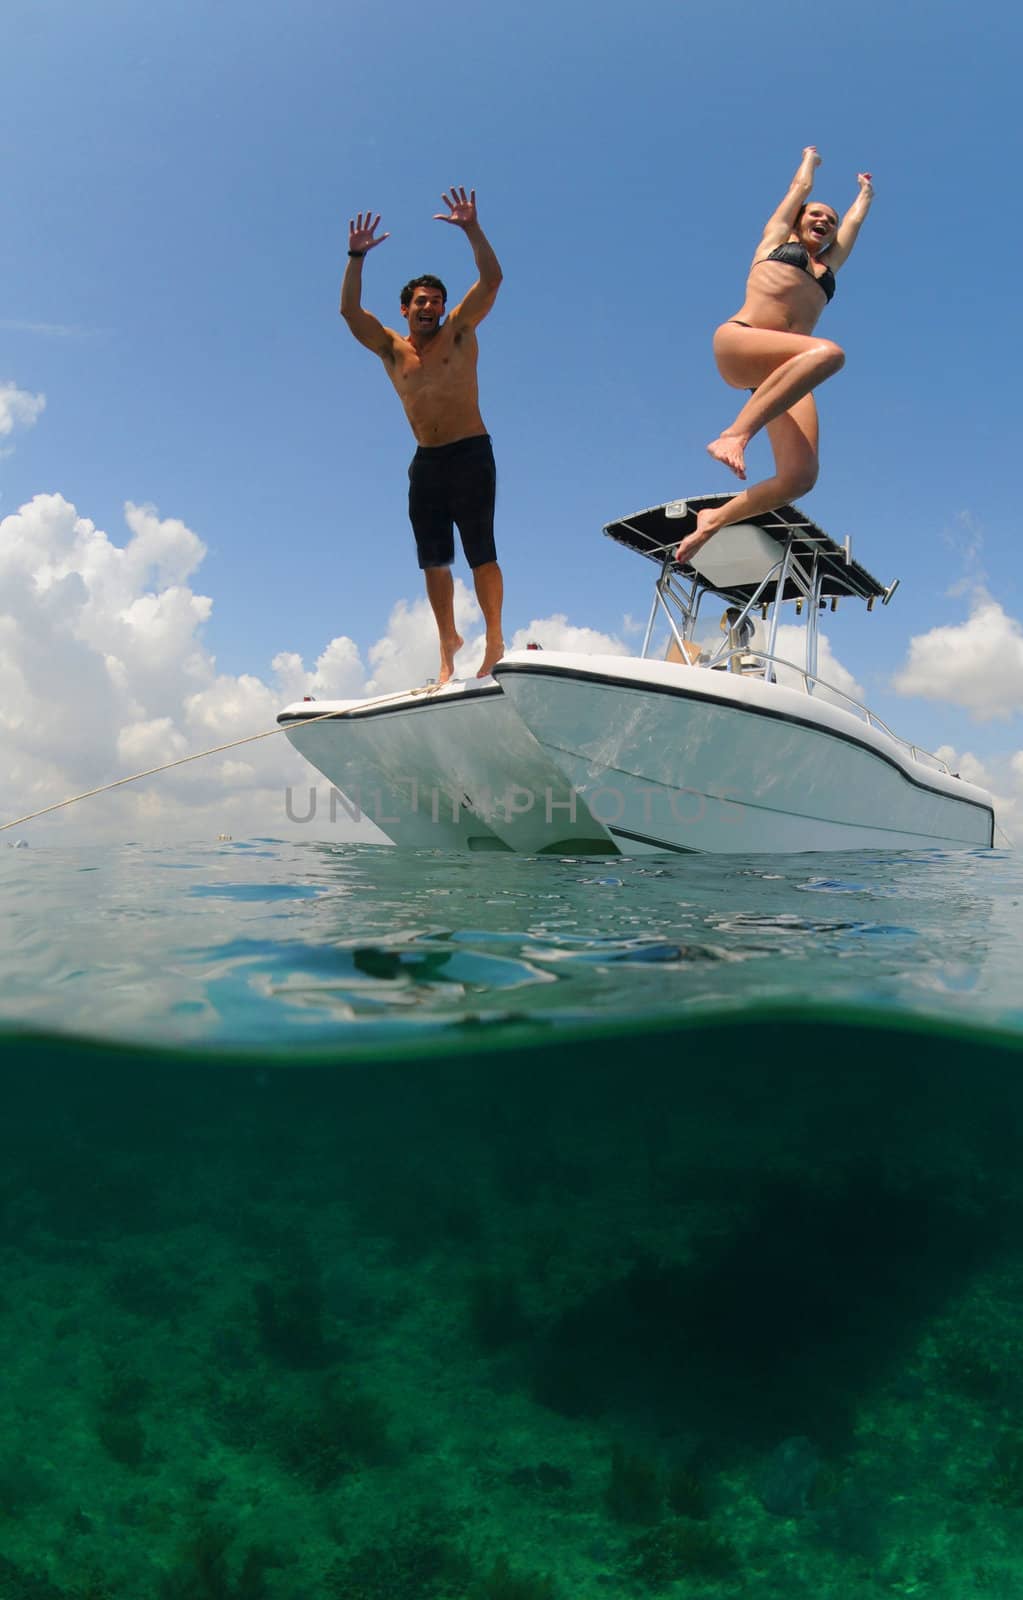 couple jumping off boat by ftlaudgirl